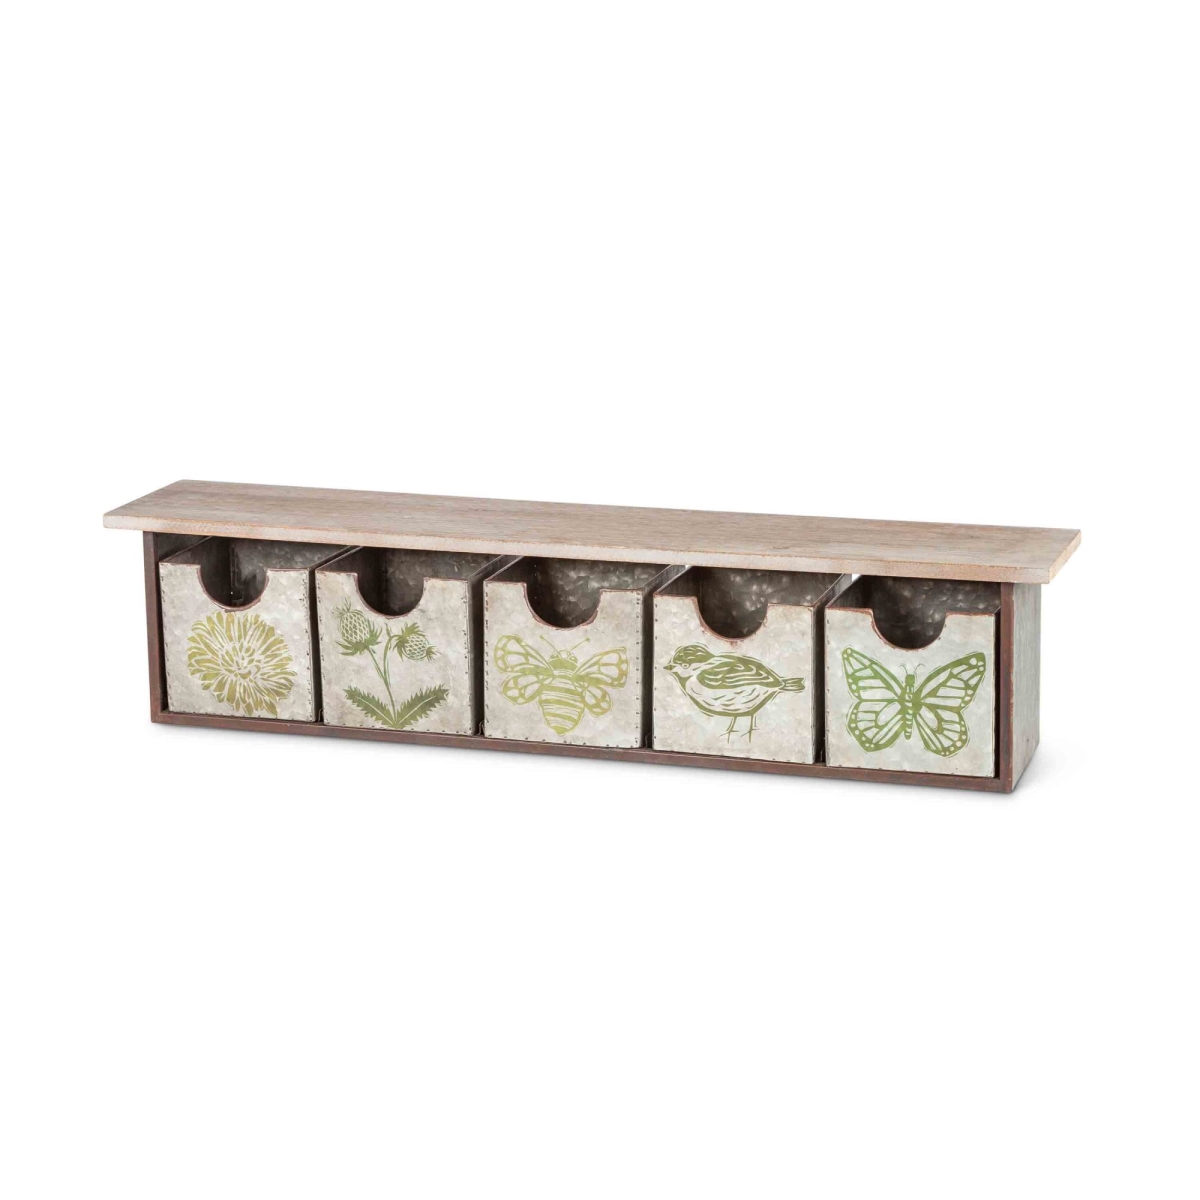 Gerson 94474ec Wood & Metal Wall Organizer With Five Drawers Decorated With Green Tow Tone Linocut Designs - Multi Color